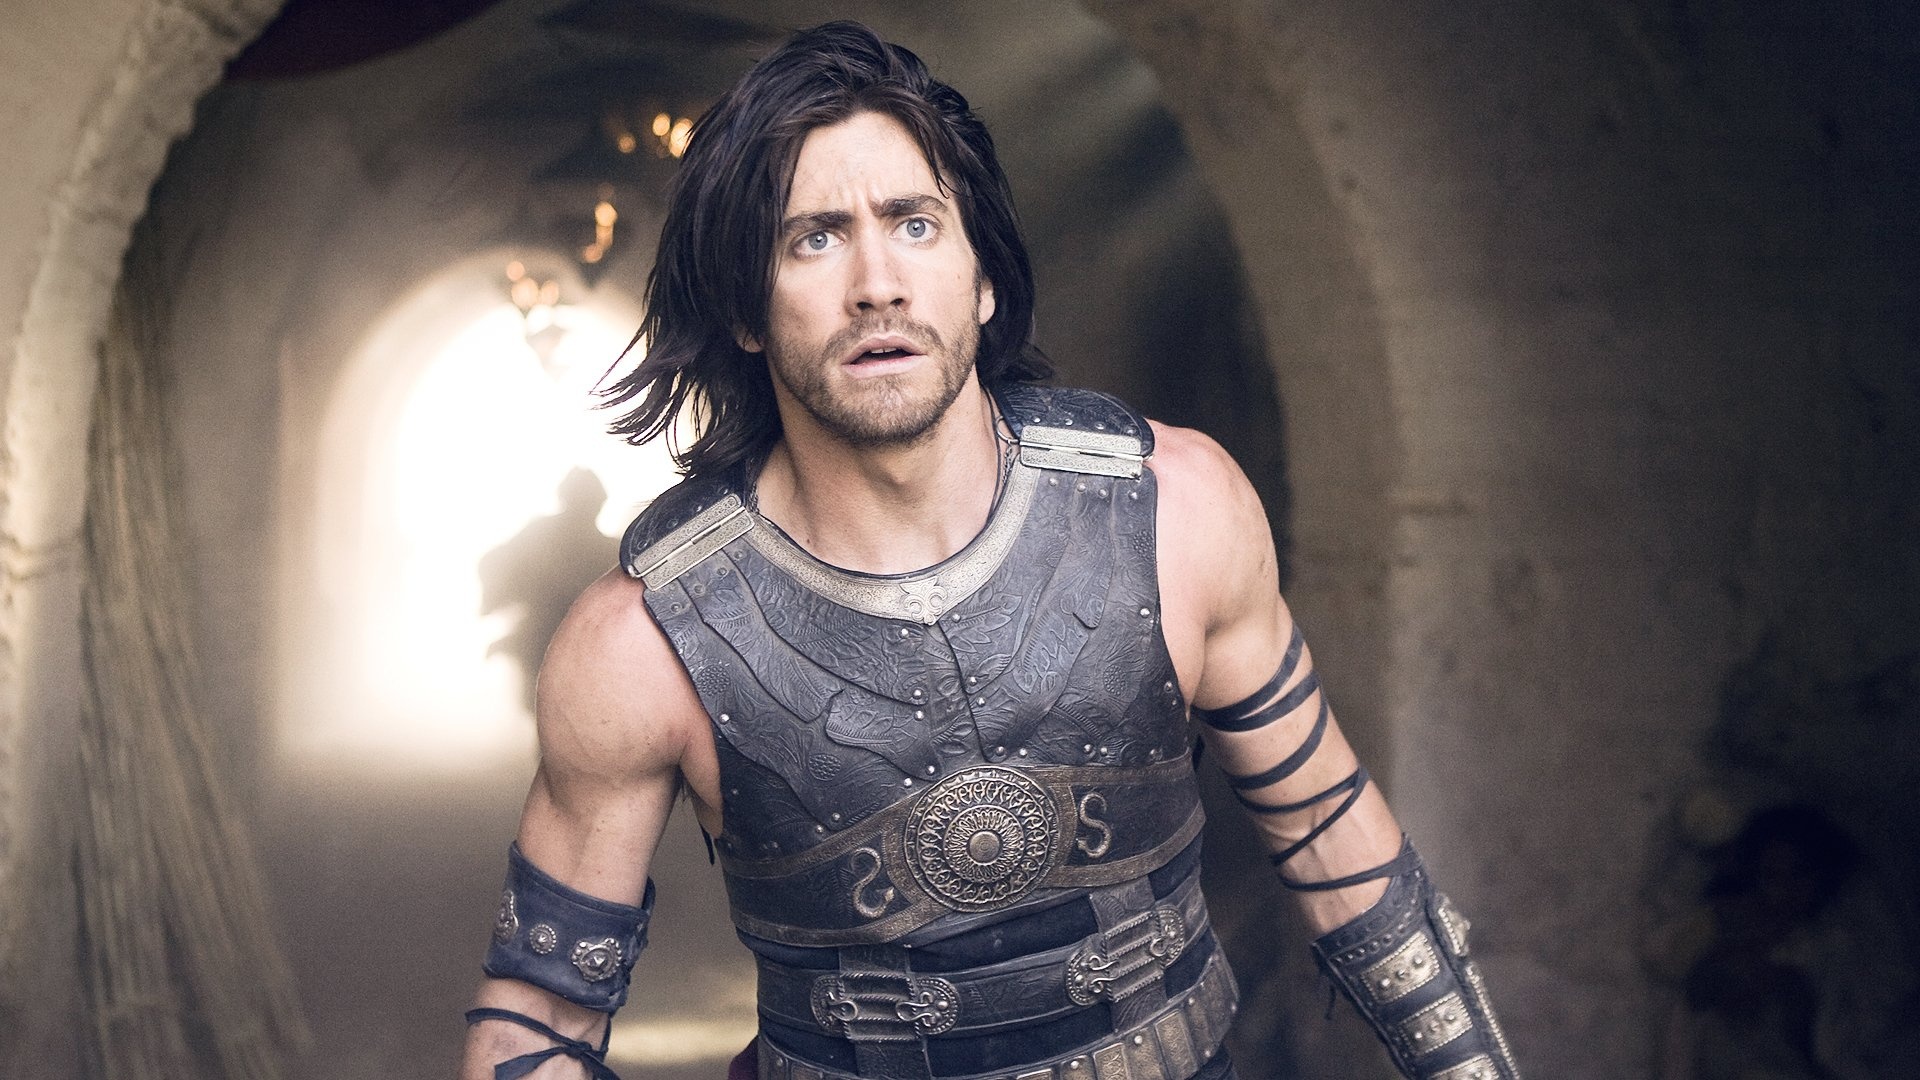 Jake Gyllenhaal: Played the lead role in Prince of Persia: The Sands of Time (2010). 1920x1080 Full HD Background.